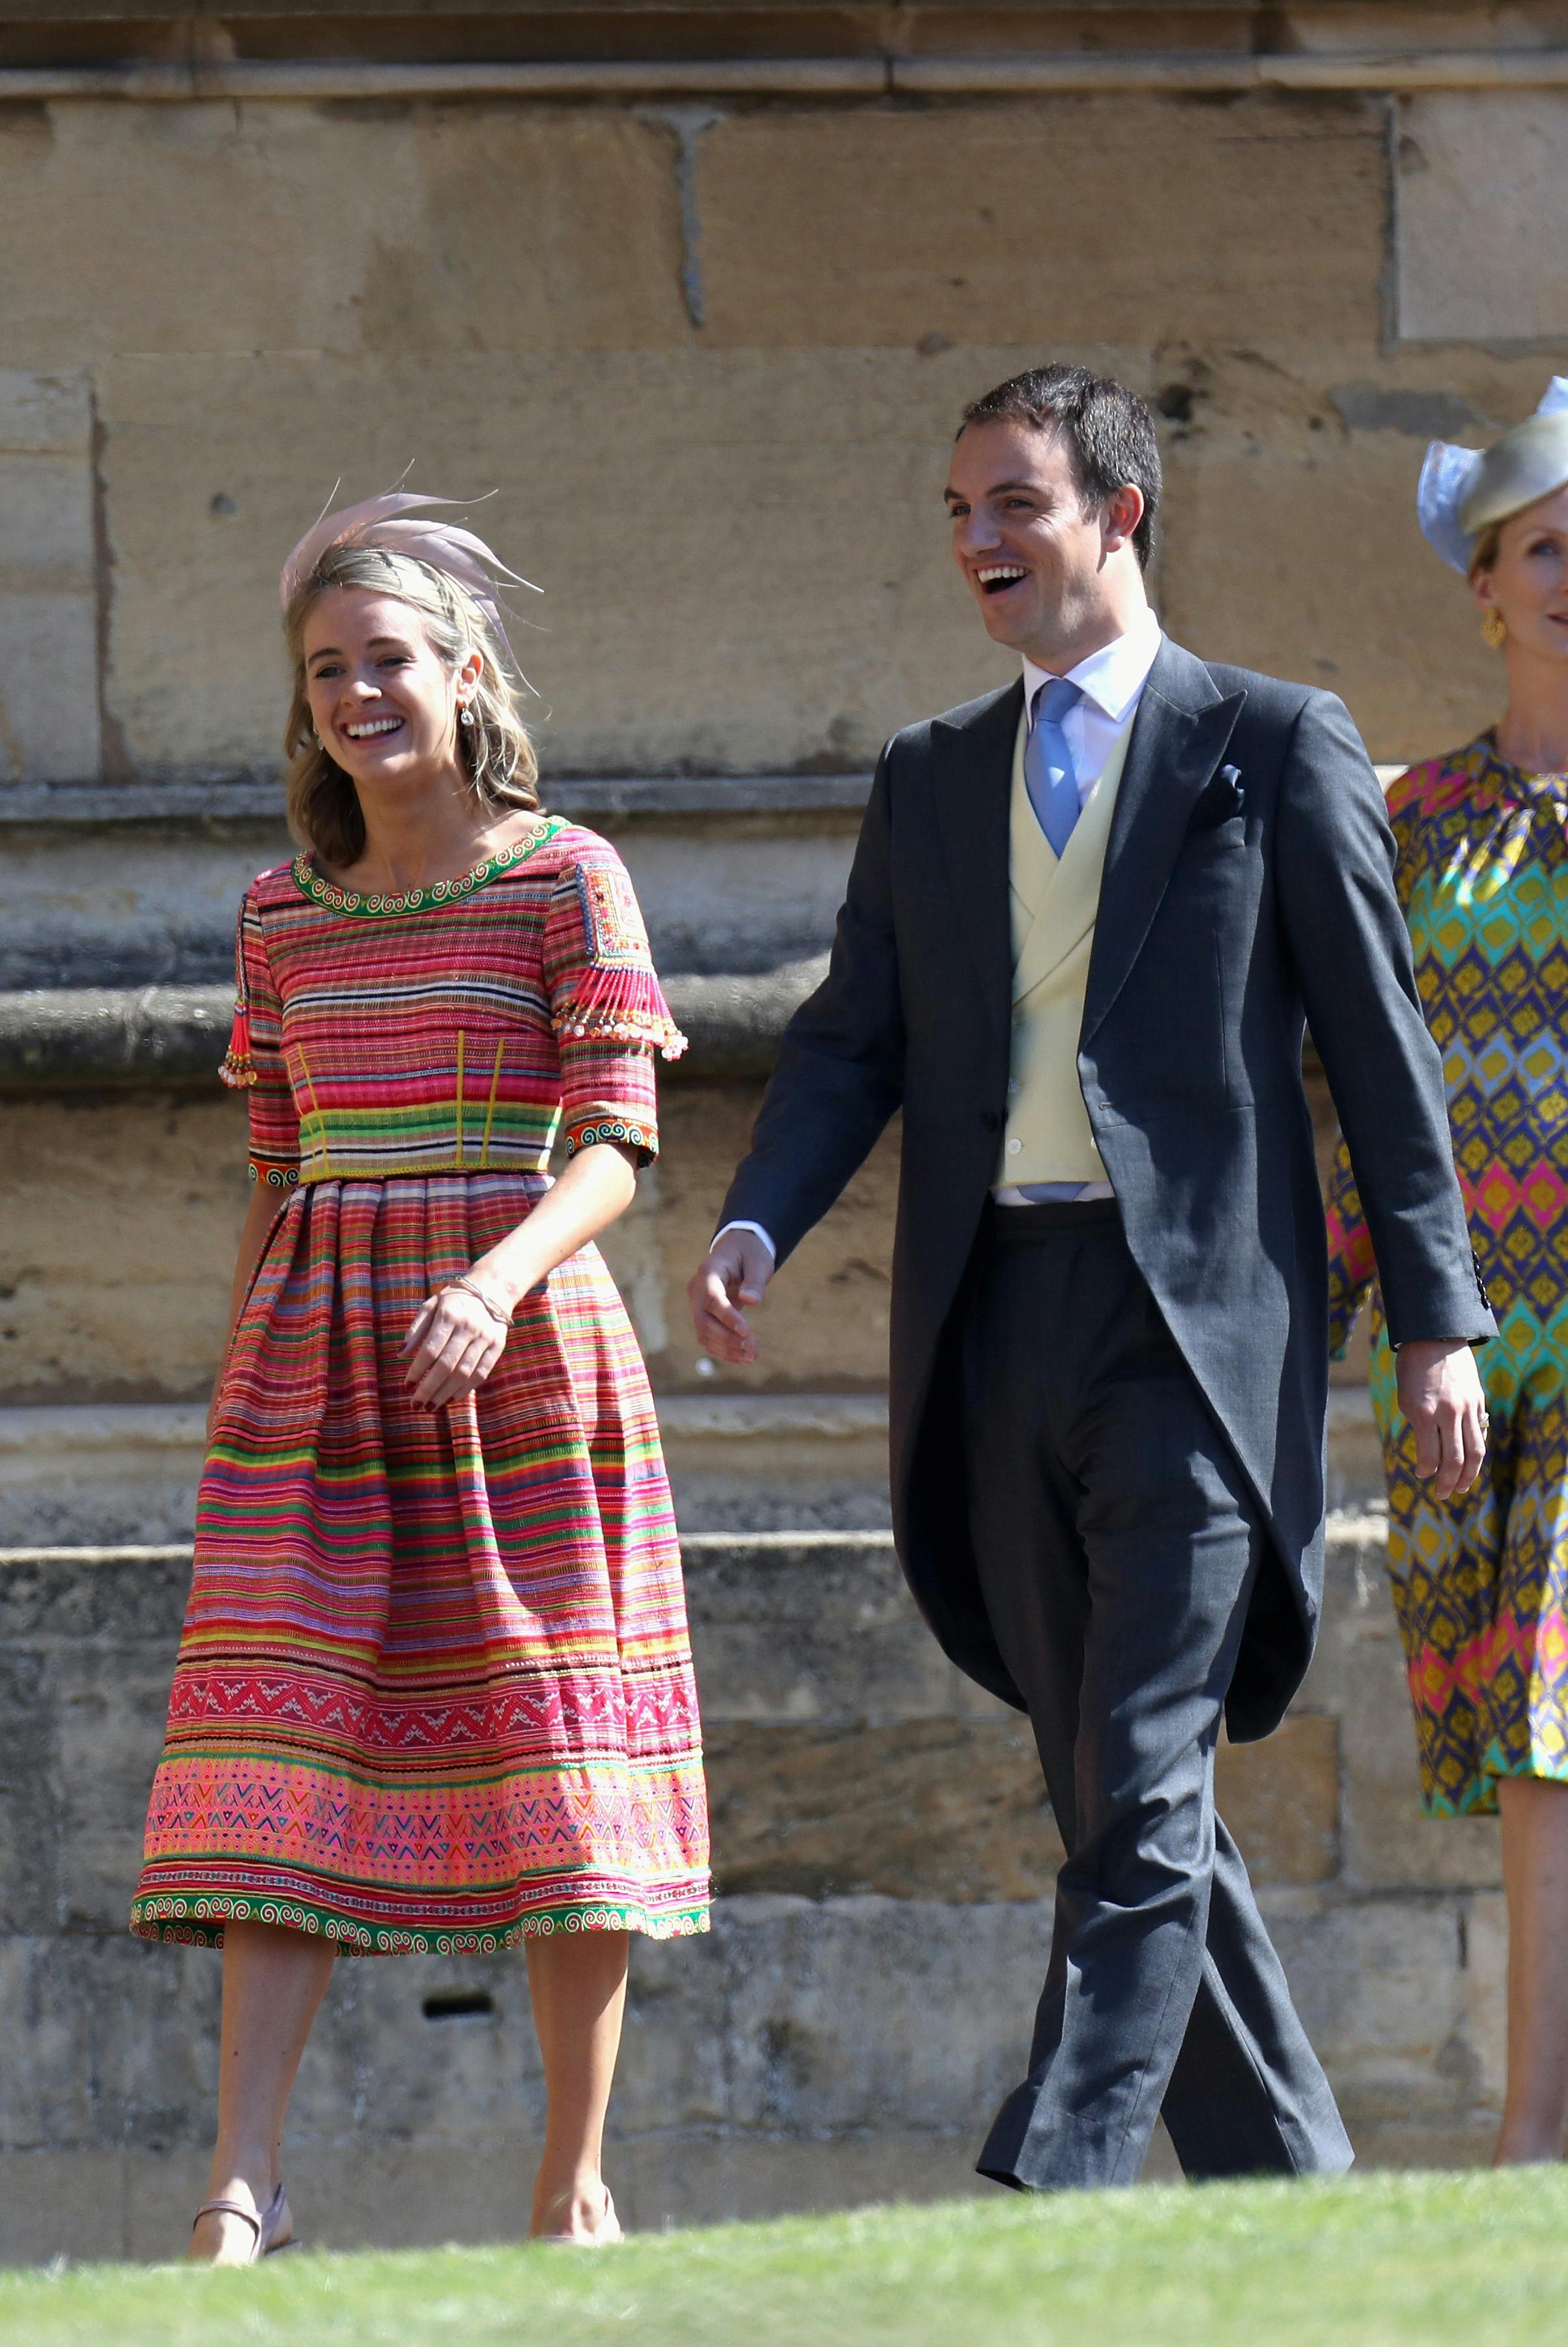 Cressida Bonas (L) attends the wedding of Prince Harry to Ms Meghan Markle at St George's Chapel, Windsor Castle on May 19, 2018 in Windsor, England. Prince Henry Charles Albert David of Wales marries Ms. Meghan Markle in a service at St George's Chapel inside the grounds of Windsor Castle. Among the guests were 2200 members of the public, the royal family and Ms. Markle's Mother Doria Ragland. Chris Jackson/Pool via REUTERS